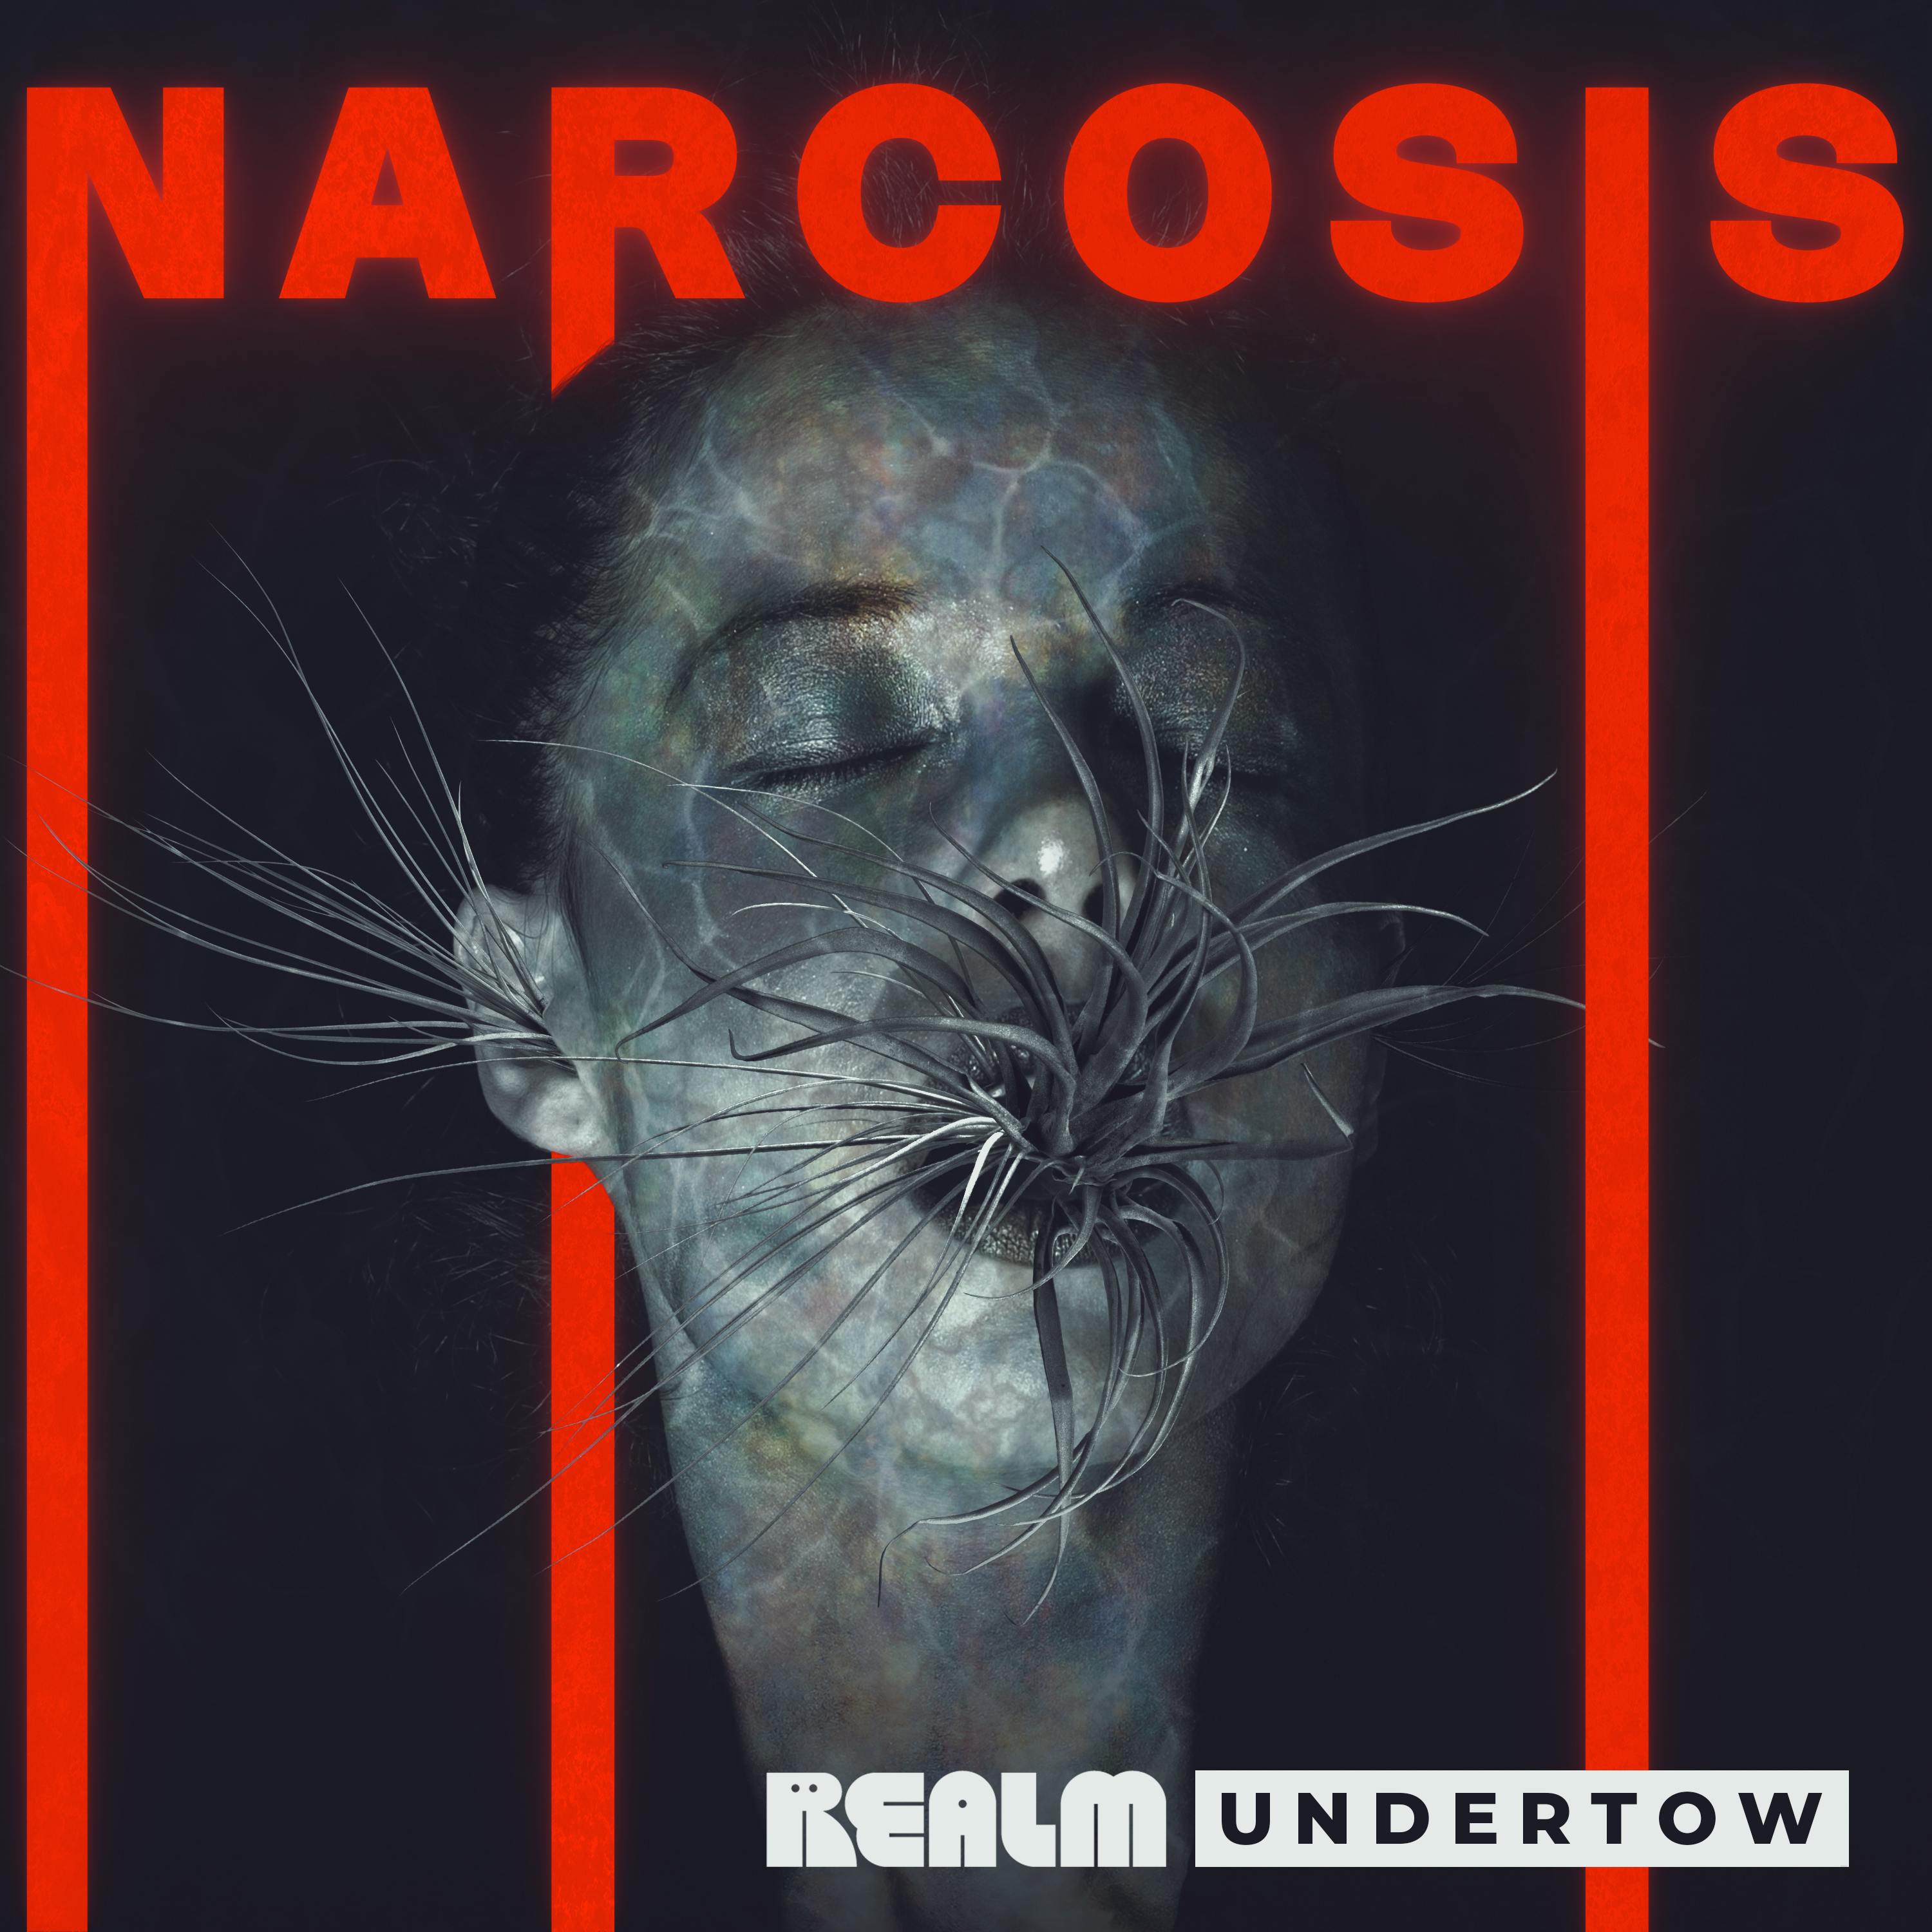 Undertow: Narcosis (Realm Unlimited) podcast tile